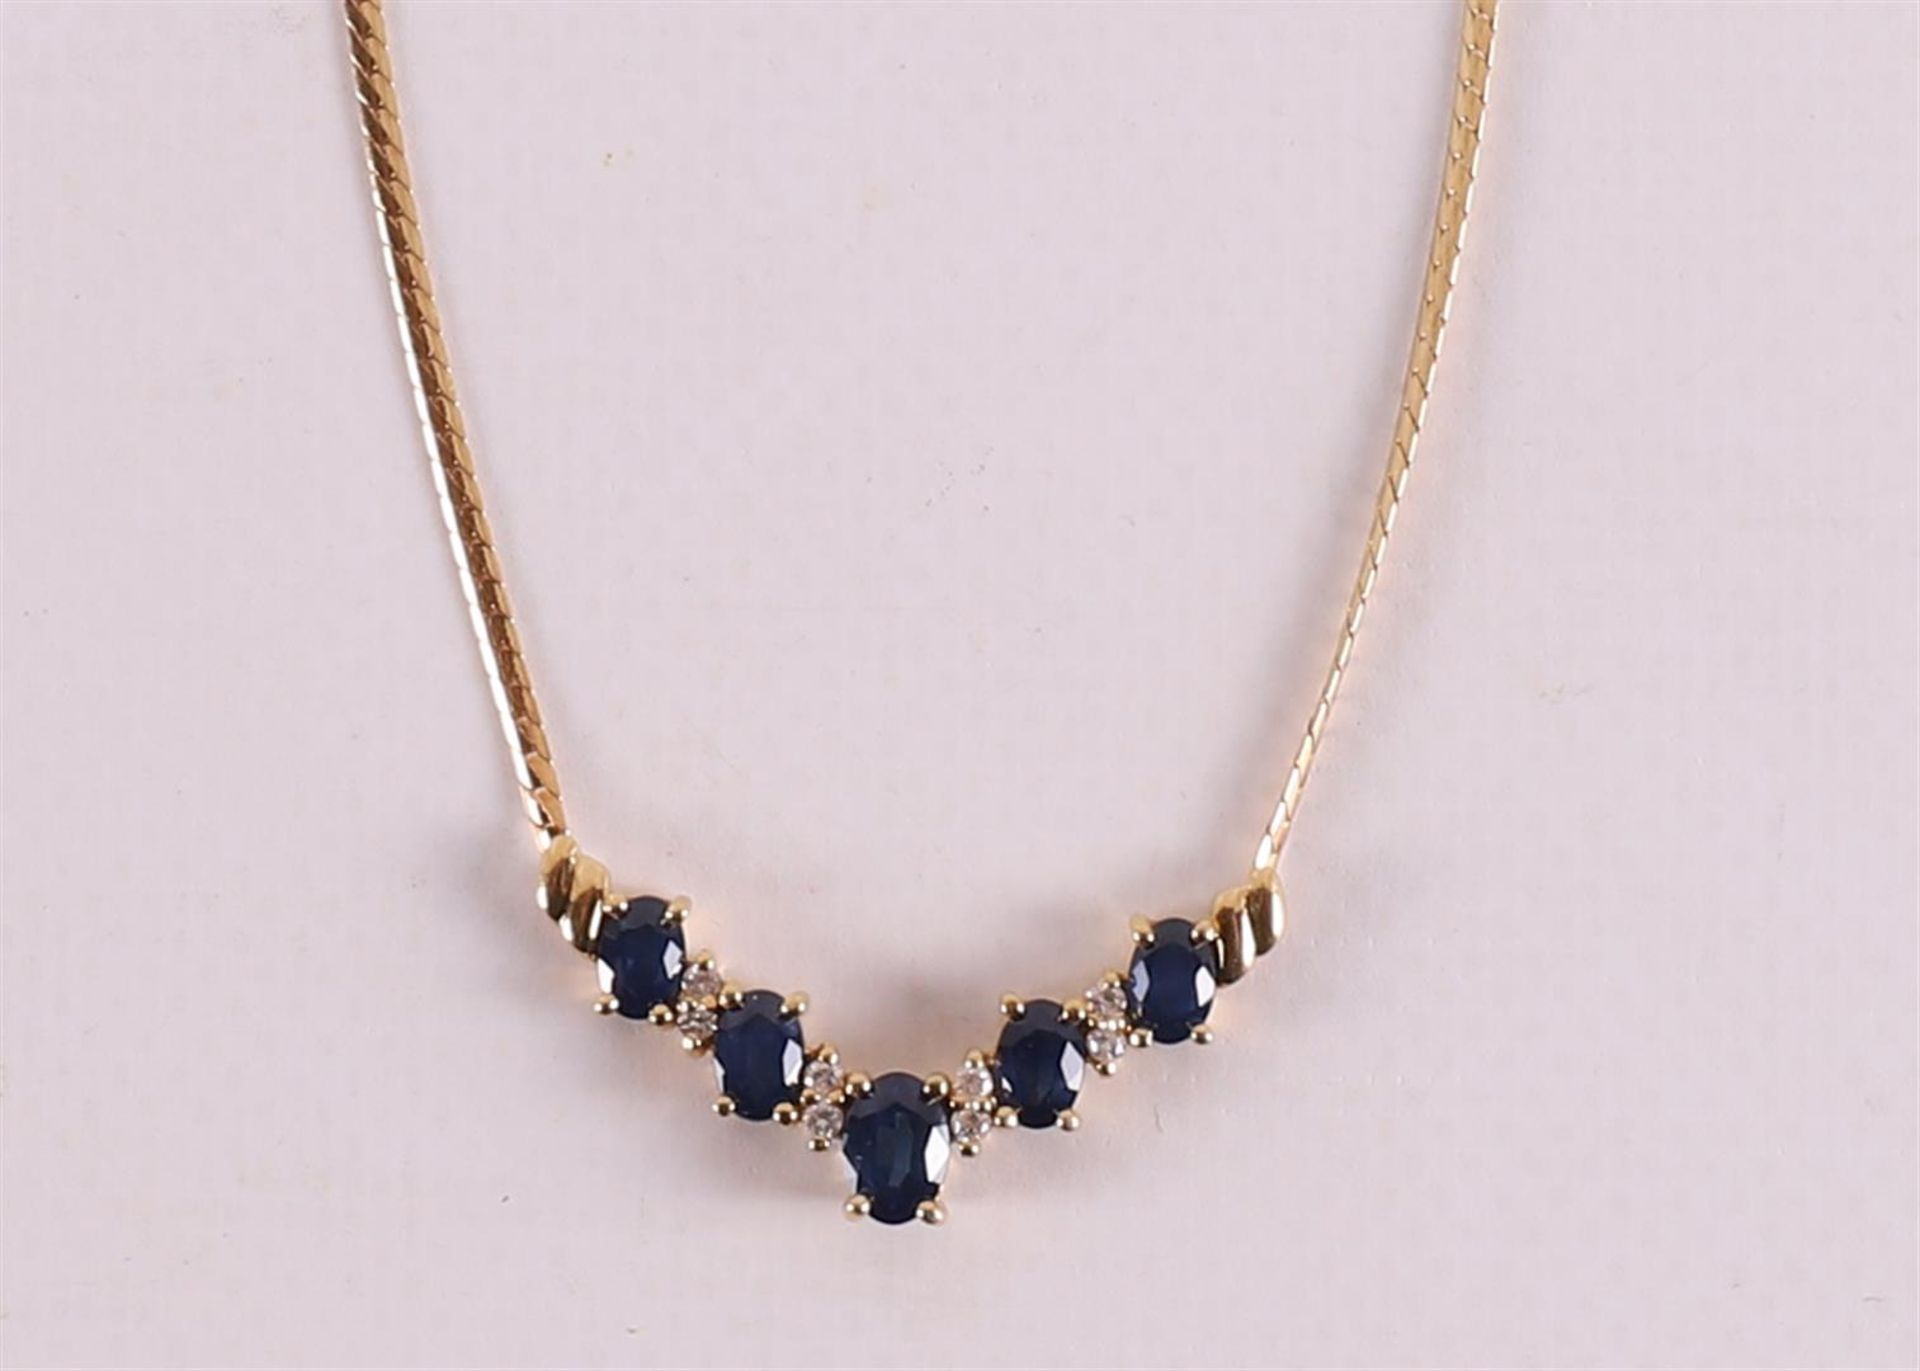 An 18 kt gold choker with 6 facet cut blue sapphires and 8 brilliants - Image 2 of 3